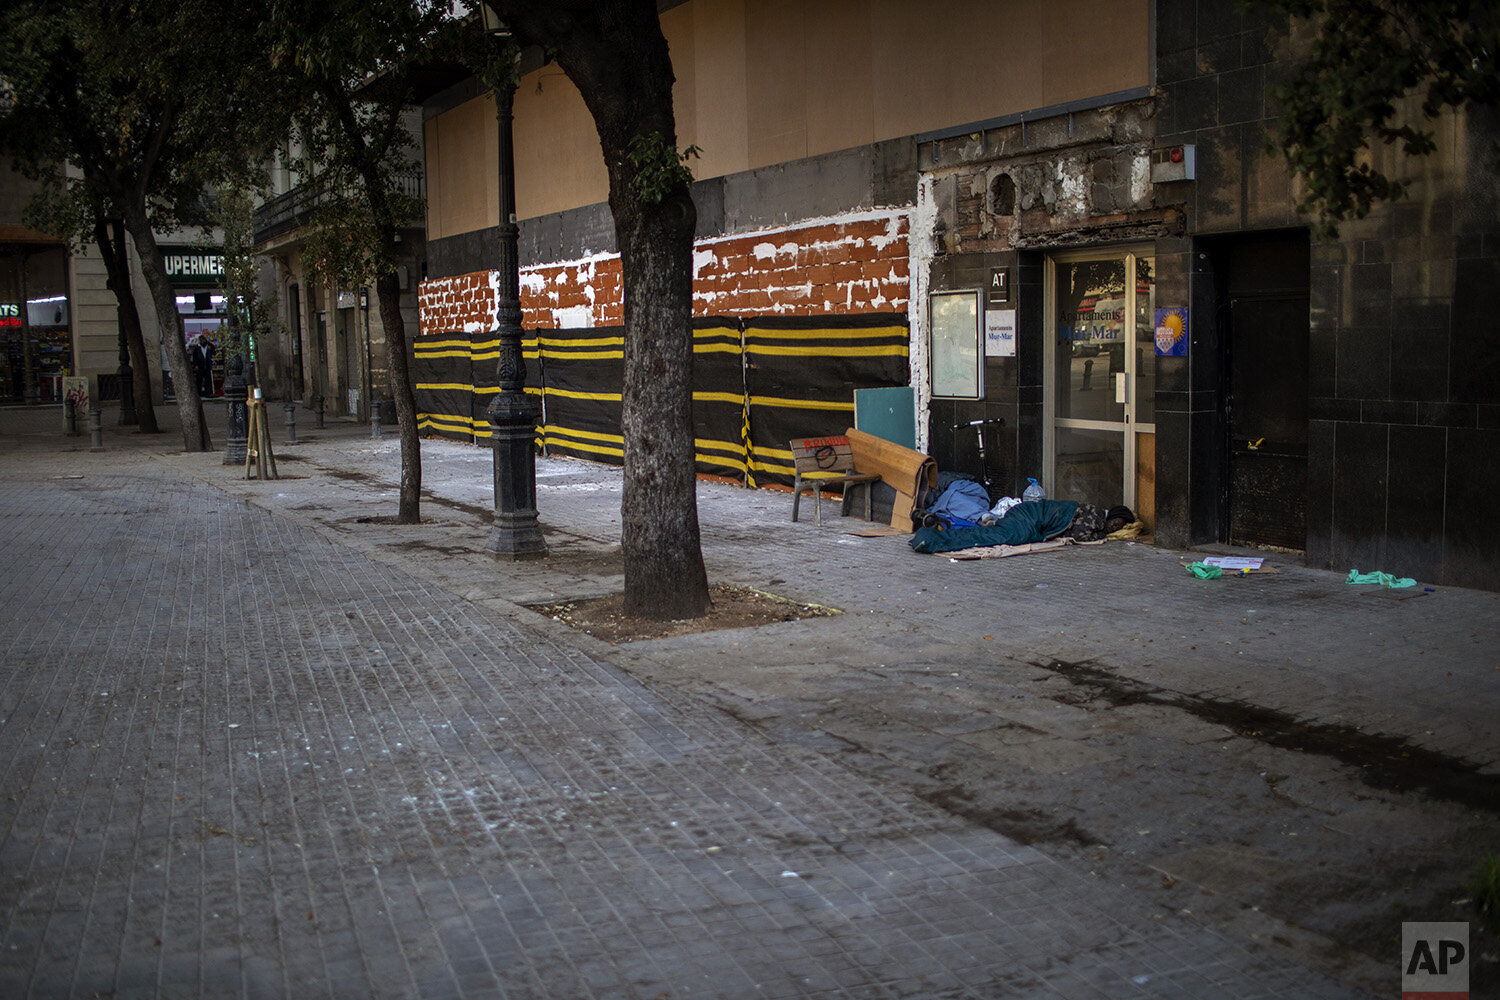  In this Thursday, March 19, 2020, a man of sub-Saharan Africa sleeps in an empty street in downtown Barcelona, Spain. (AP Photo/Emilio Morenatti) 